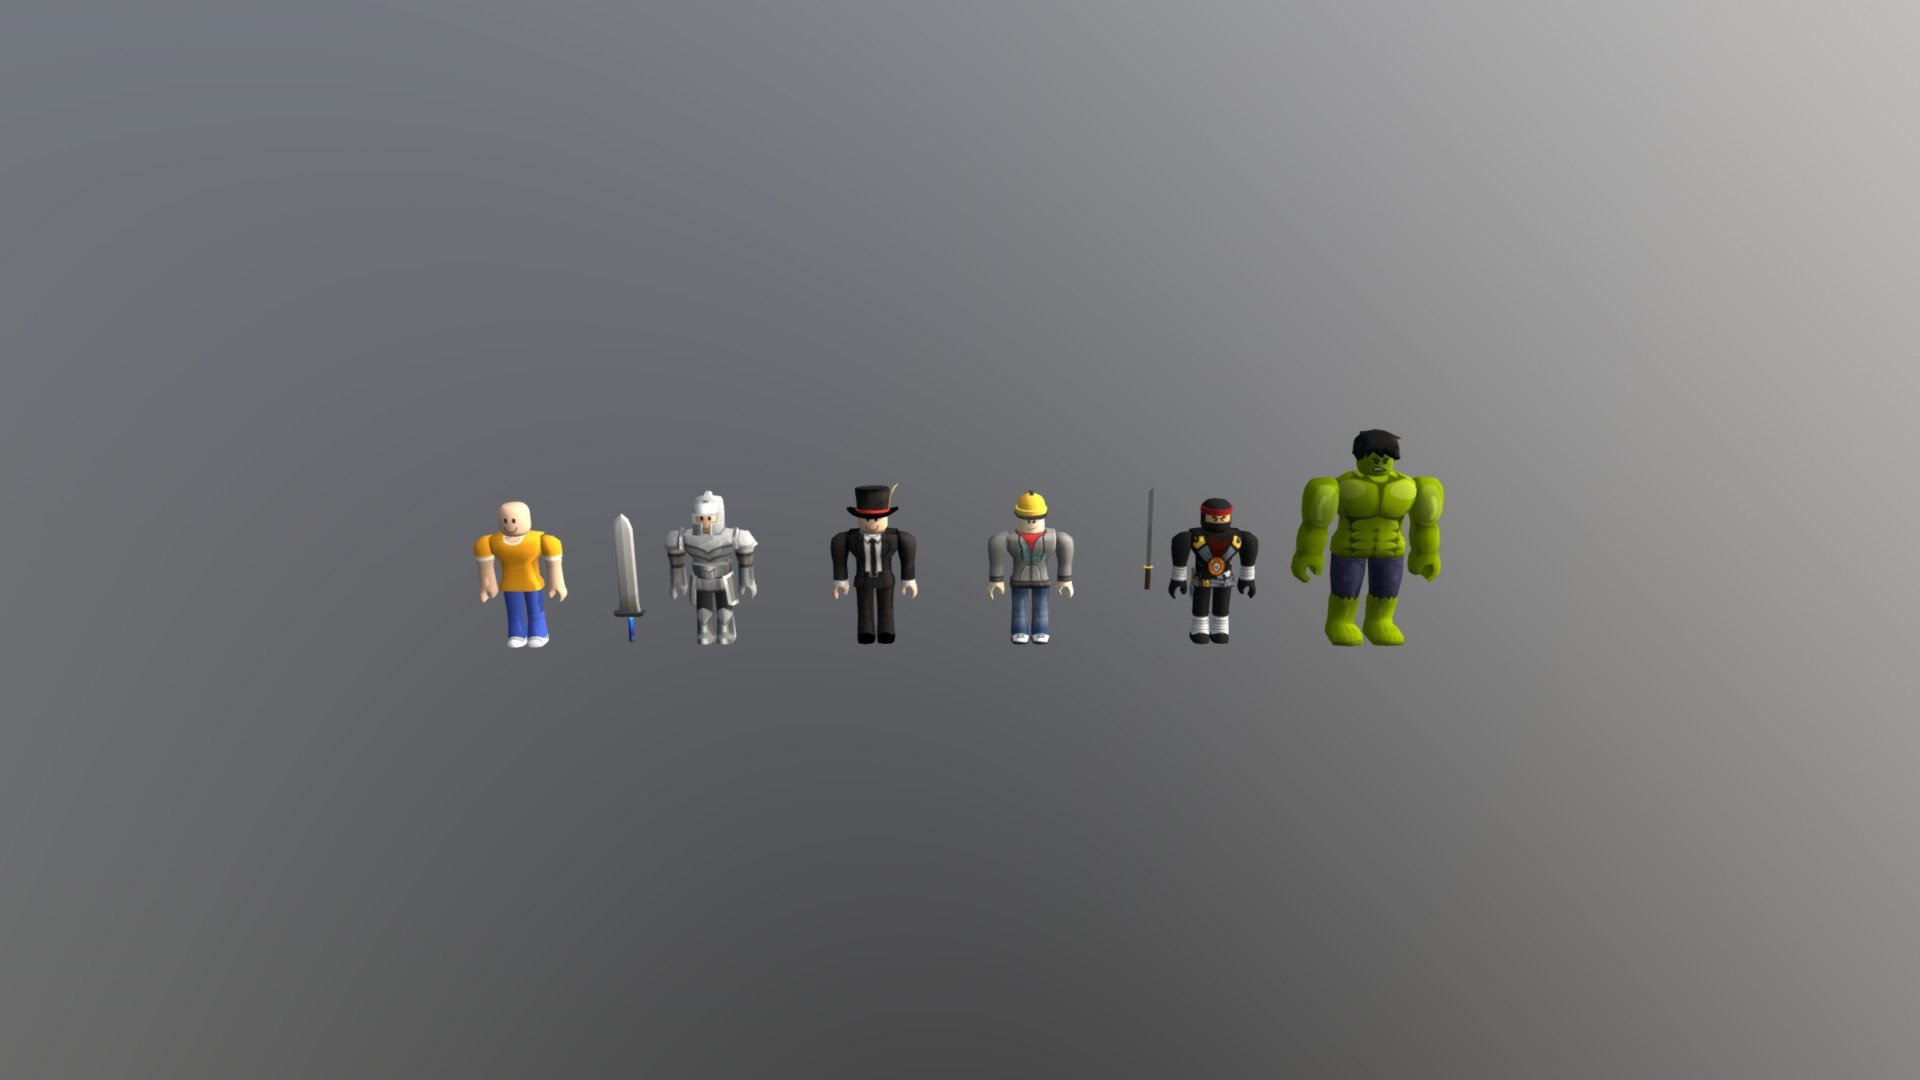 Special skin roblox character
Lowpoly ready for hyper games - Roblox Character - 3D model by Tony Pham (@tuandaika.lol) 3d model